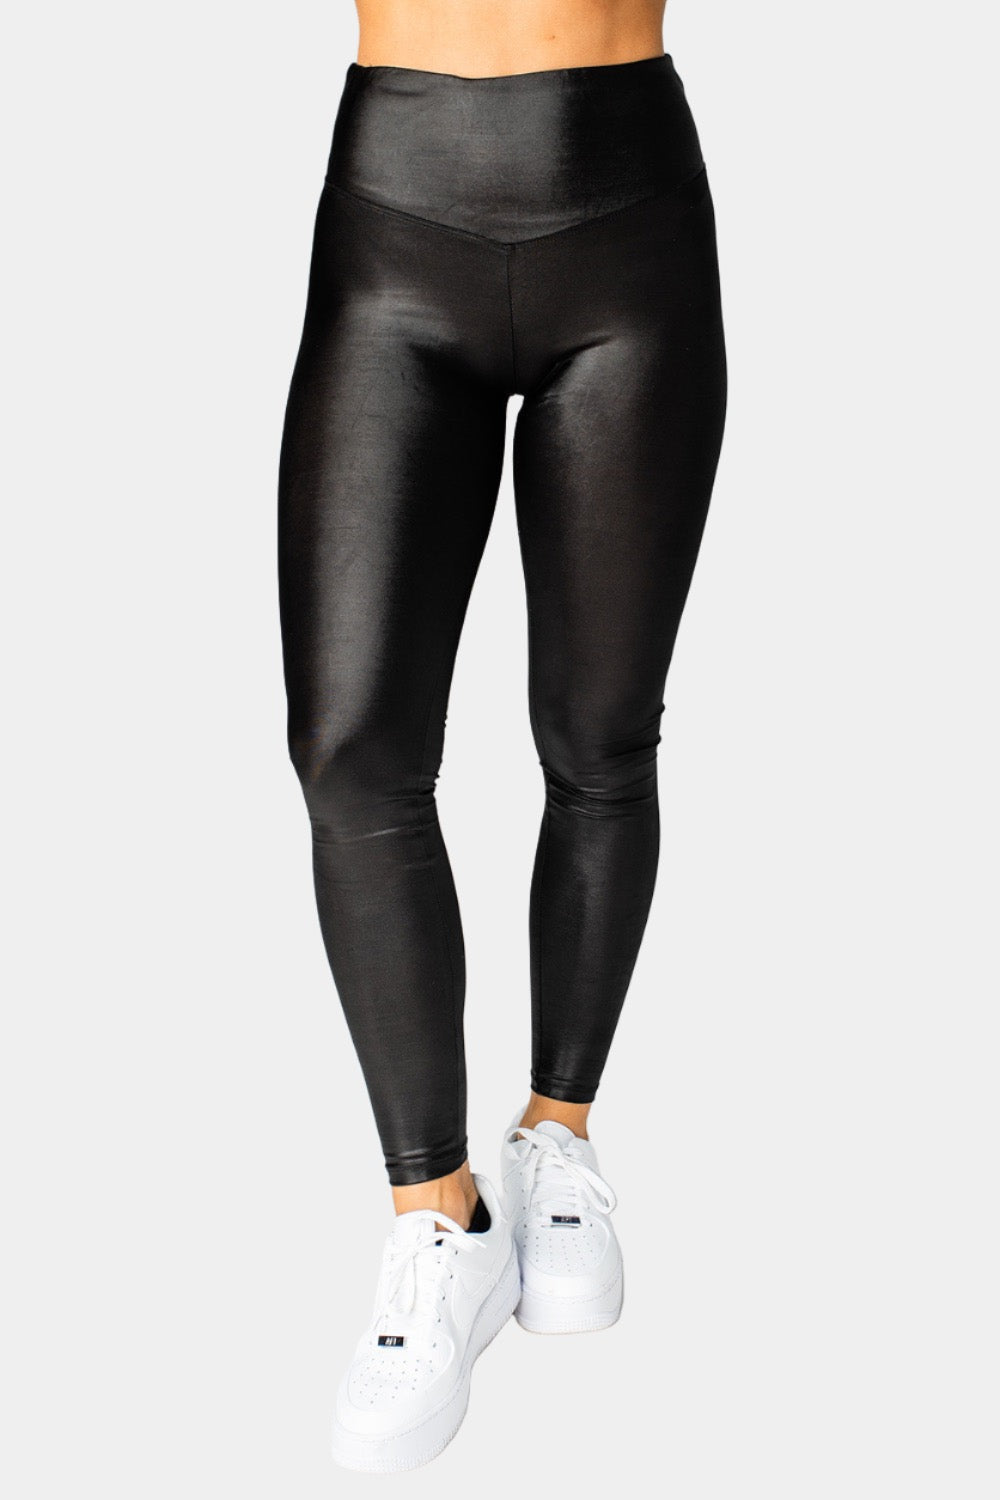 High Waisted Leggings for Women  Outfits with leggings, Black